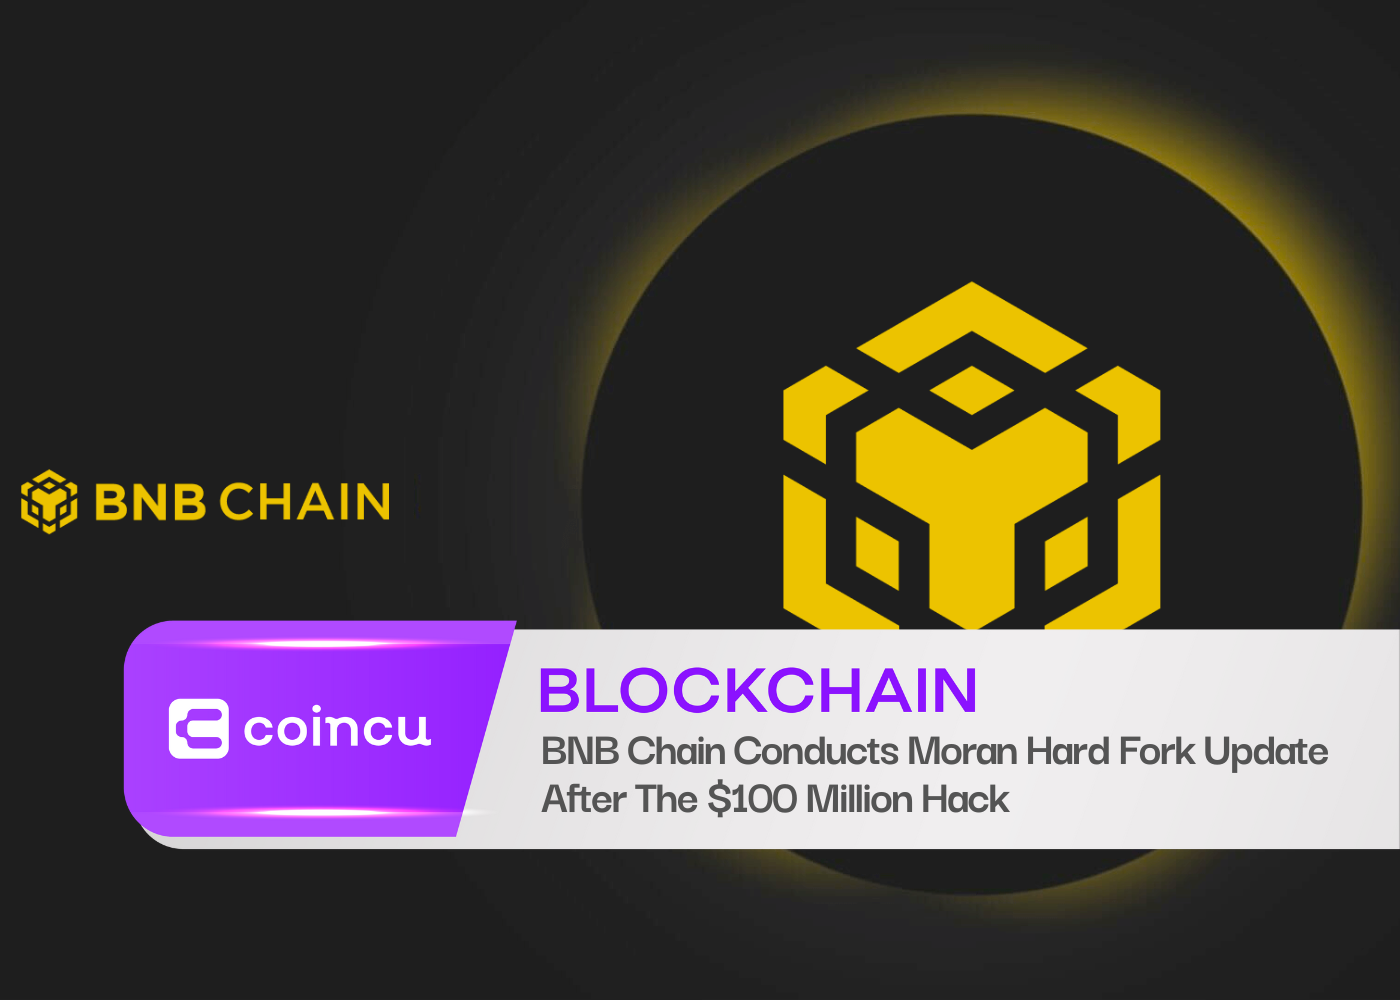 BNB Chain Conducts Moran Hard Fork Update After The $100 Million Hack